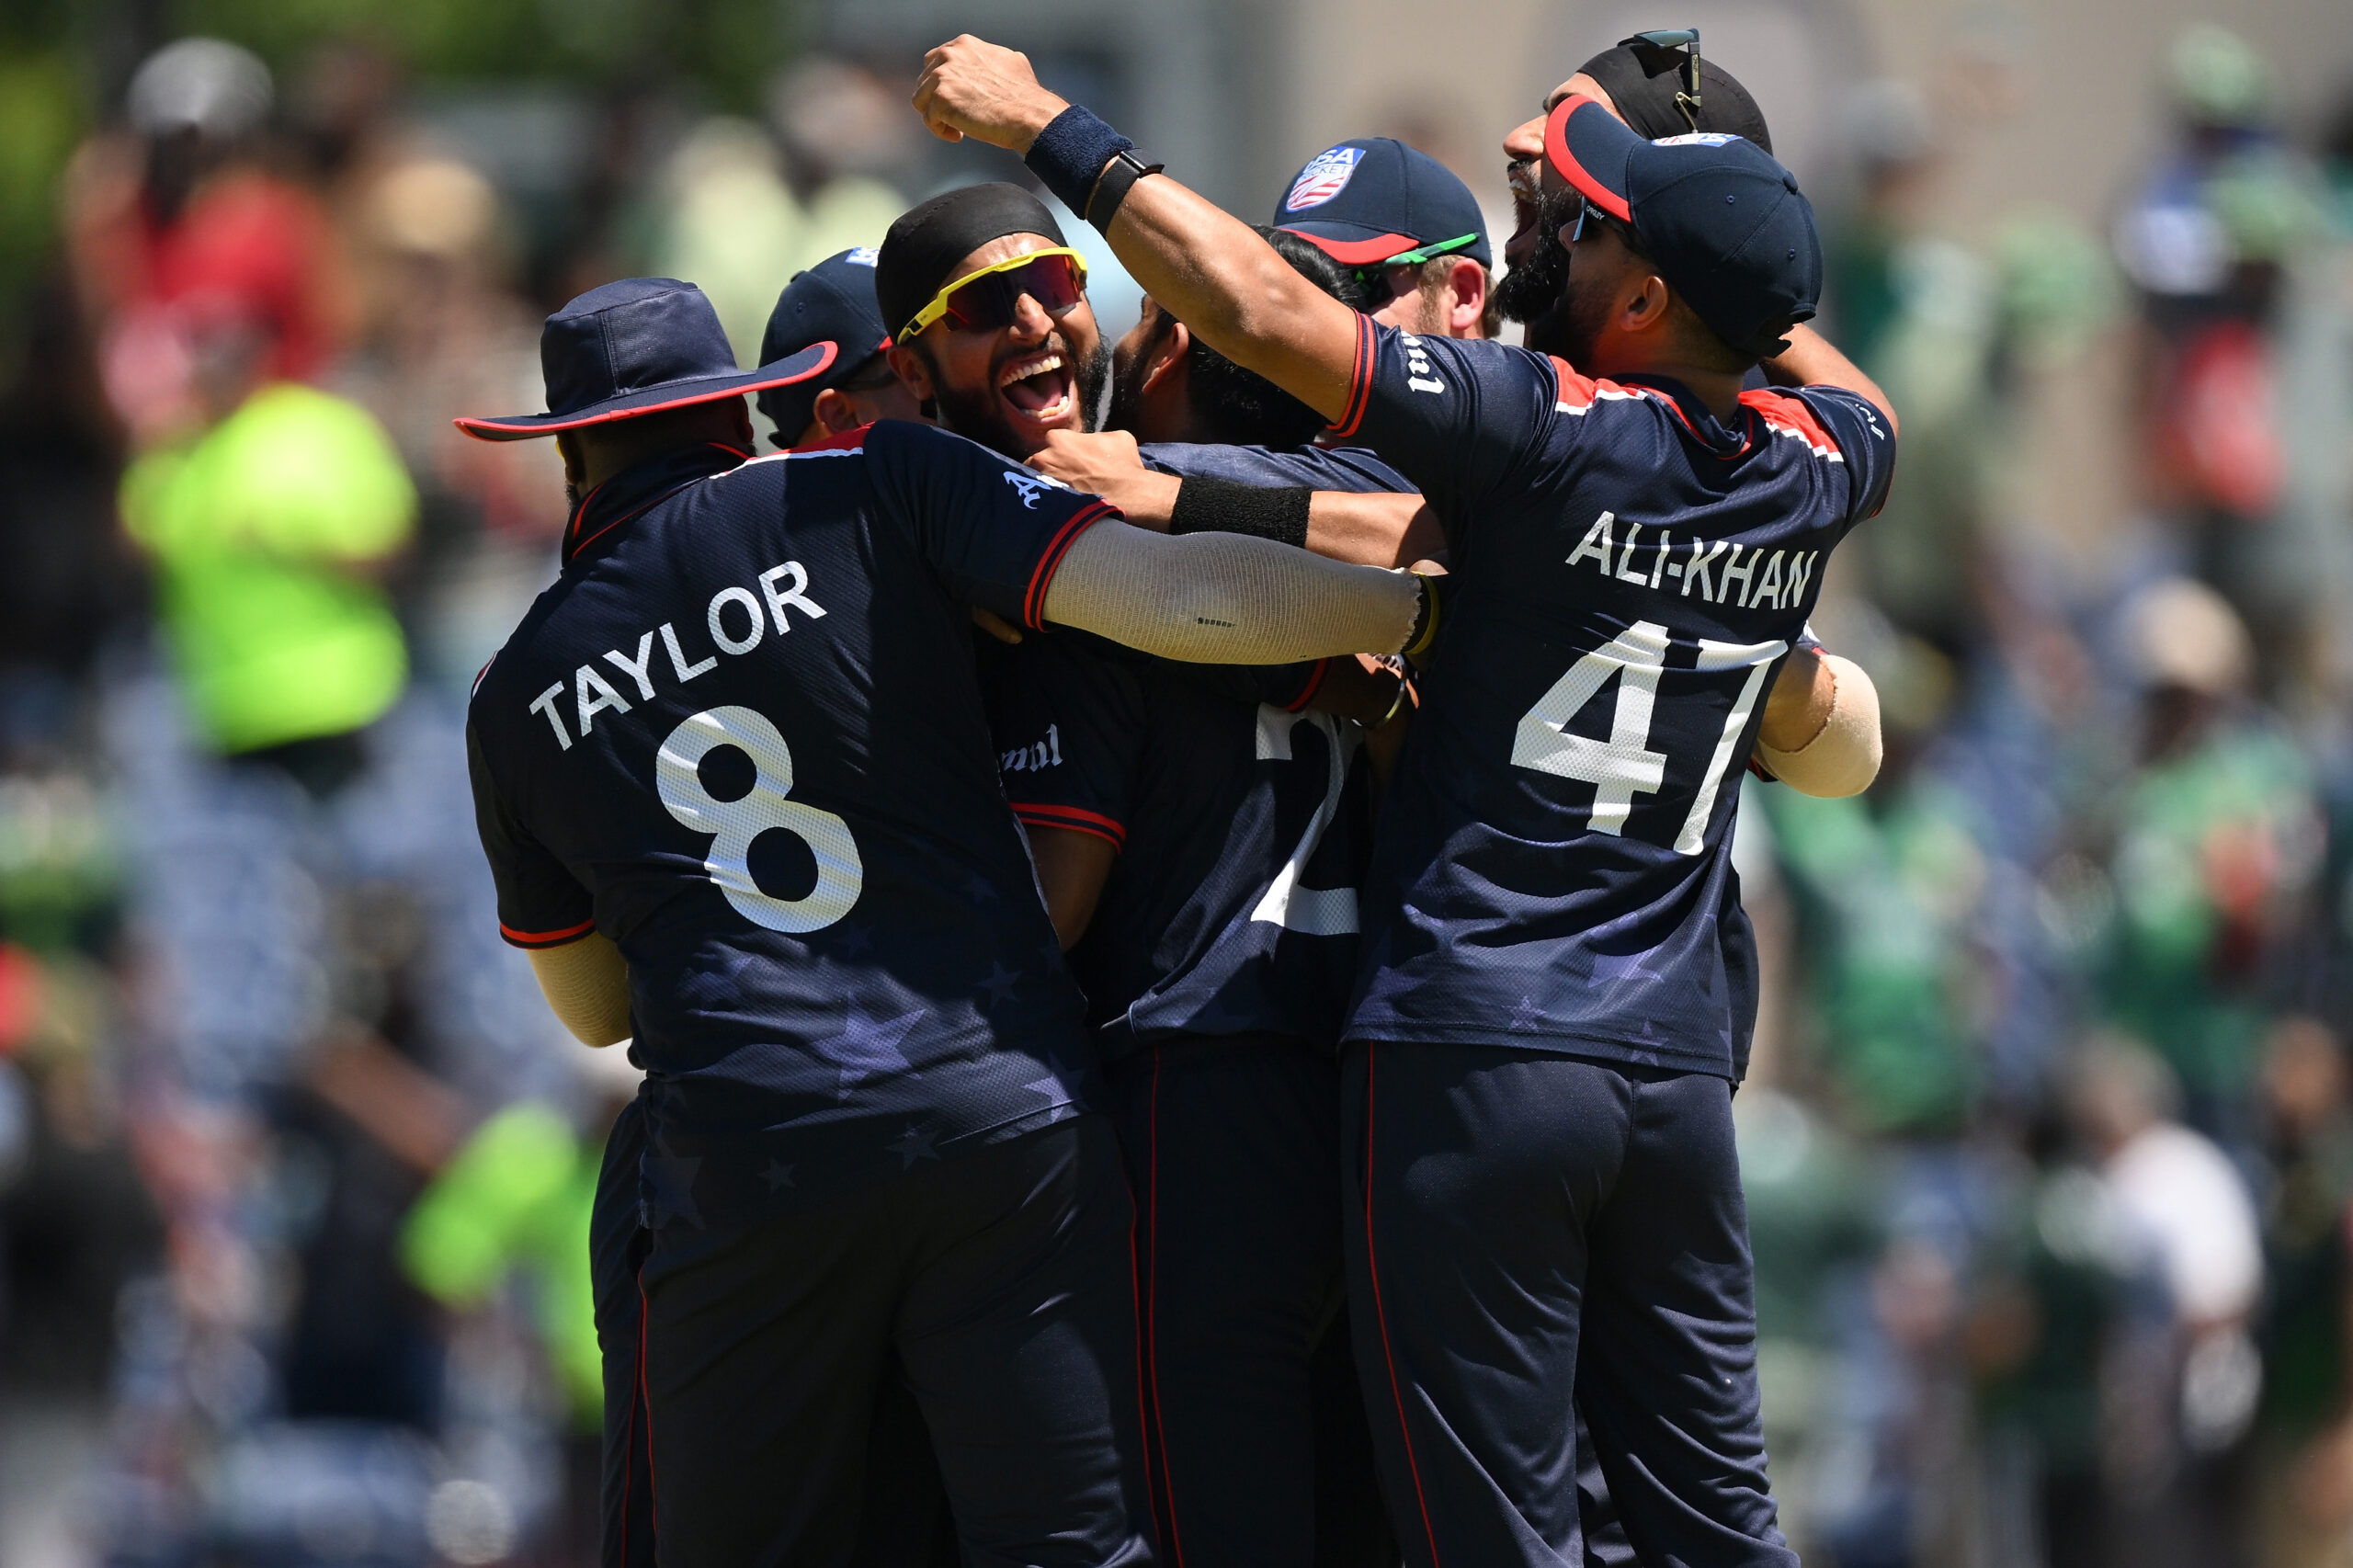 USA Cricket Advance to Super 8 Round at ICC Men’s T20 World Cup